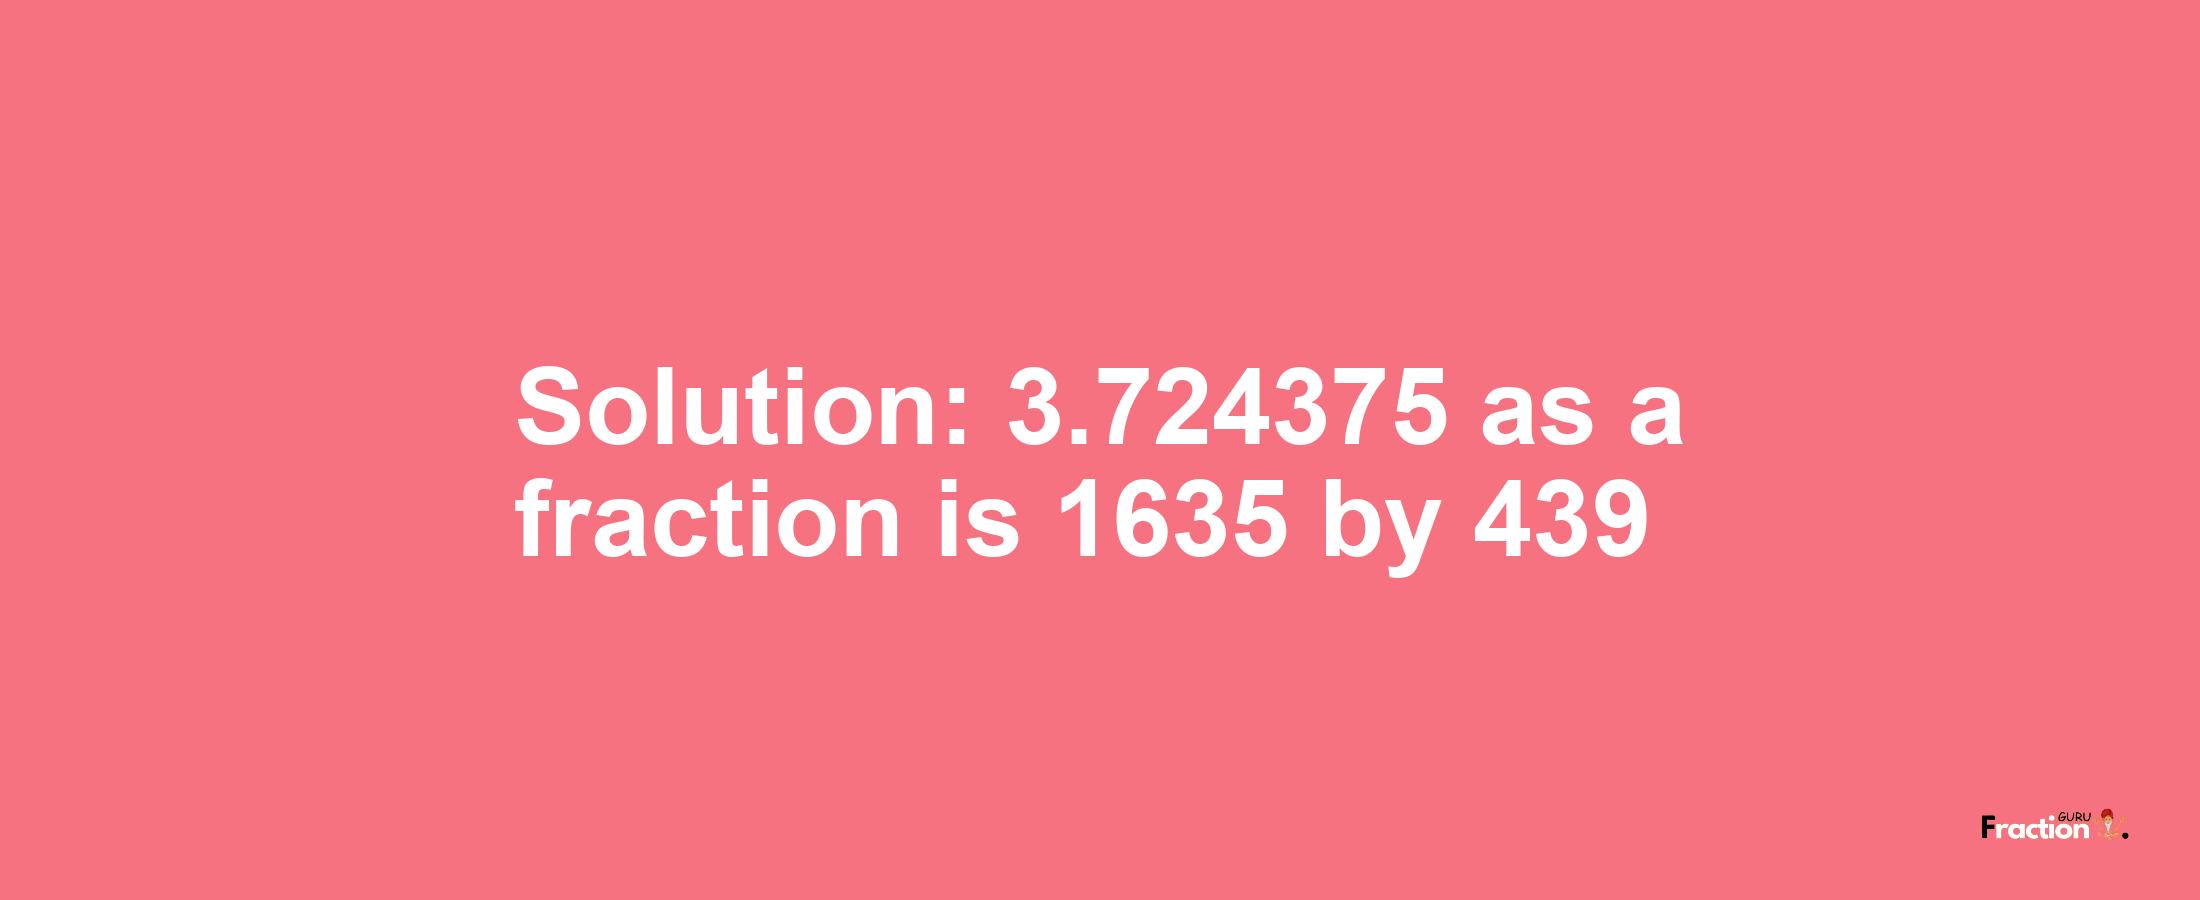 Solution:3.724375 as a fraction is 1635/439